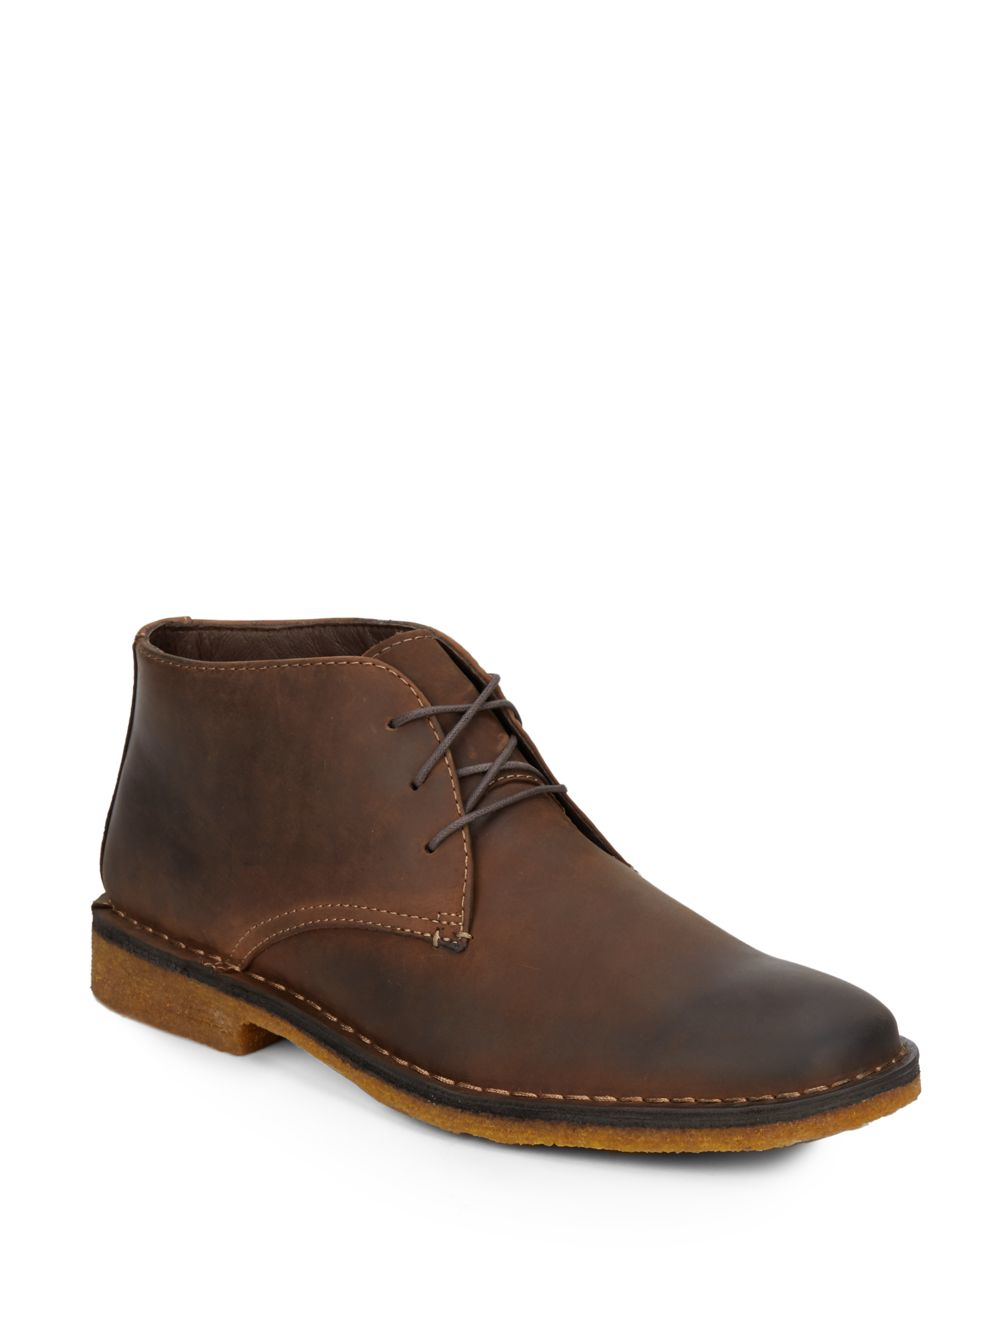 Lyst - Johnston & Murphy Bollinger Leather Chukka Boots in Brown for Men